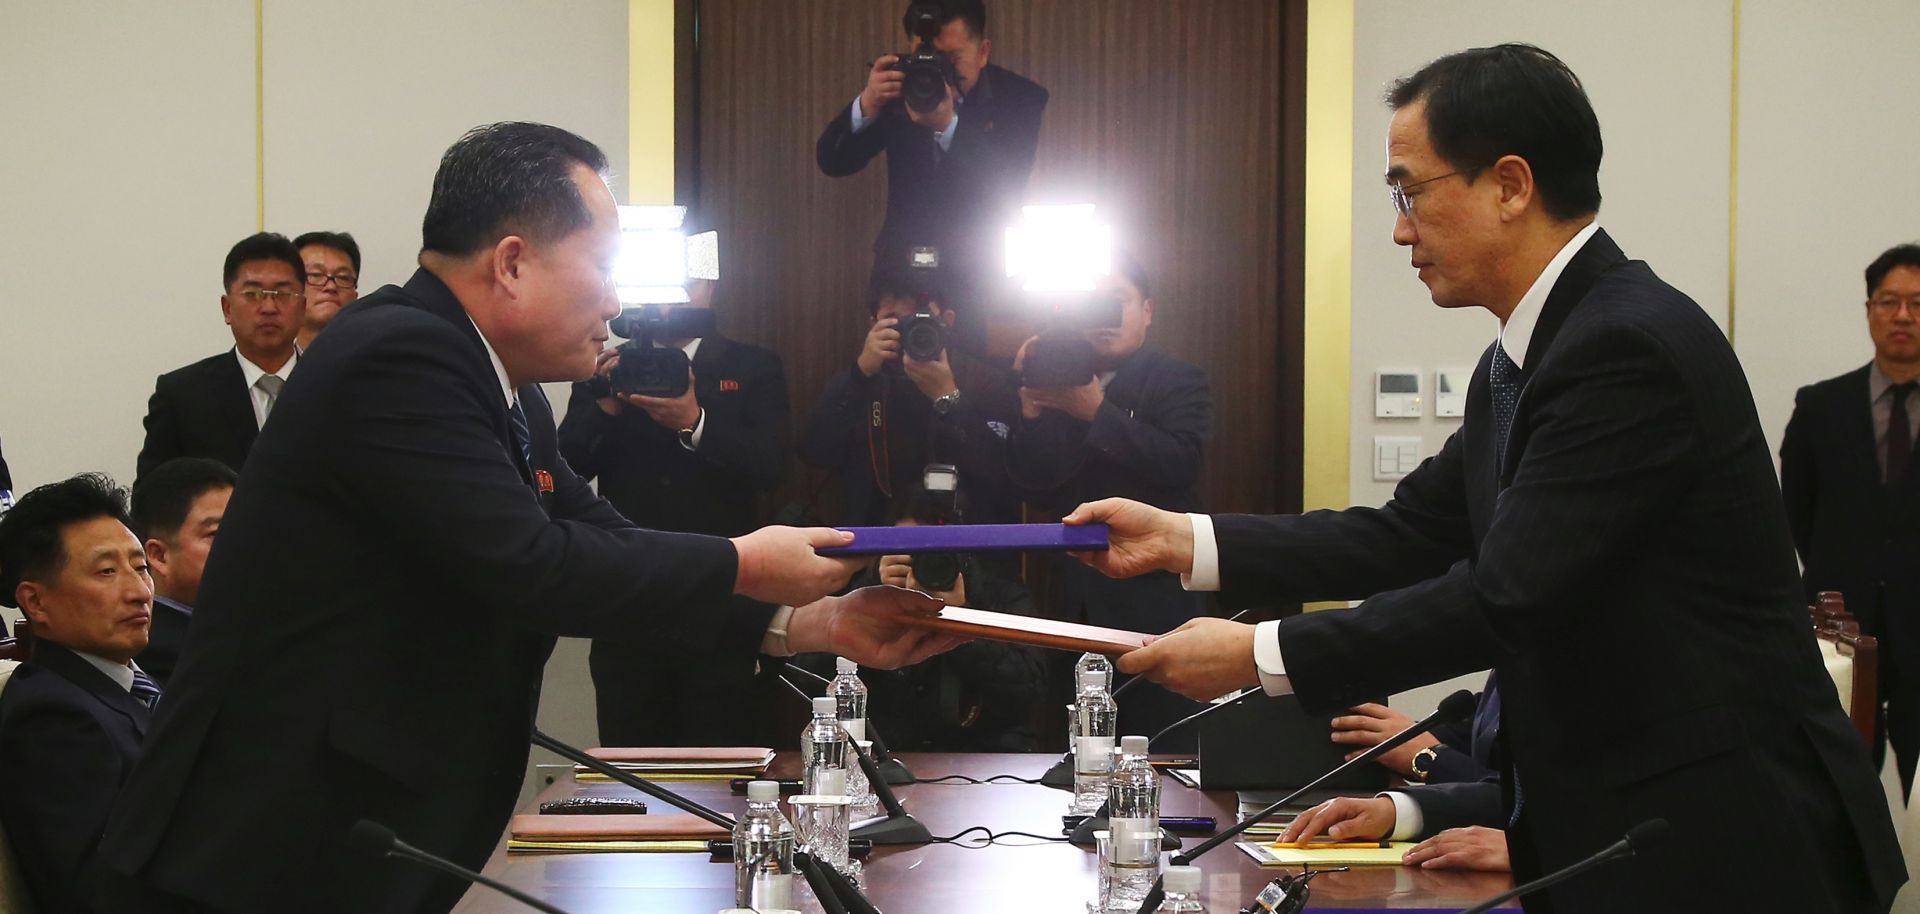 South and North Korean officials exchange joint statements Jan. 9 in the Demilitarized Zone after agreeing that athletes from North Korea would participate in the 2018 Winter Olympics in Pyeongchang, South Korea.